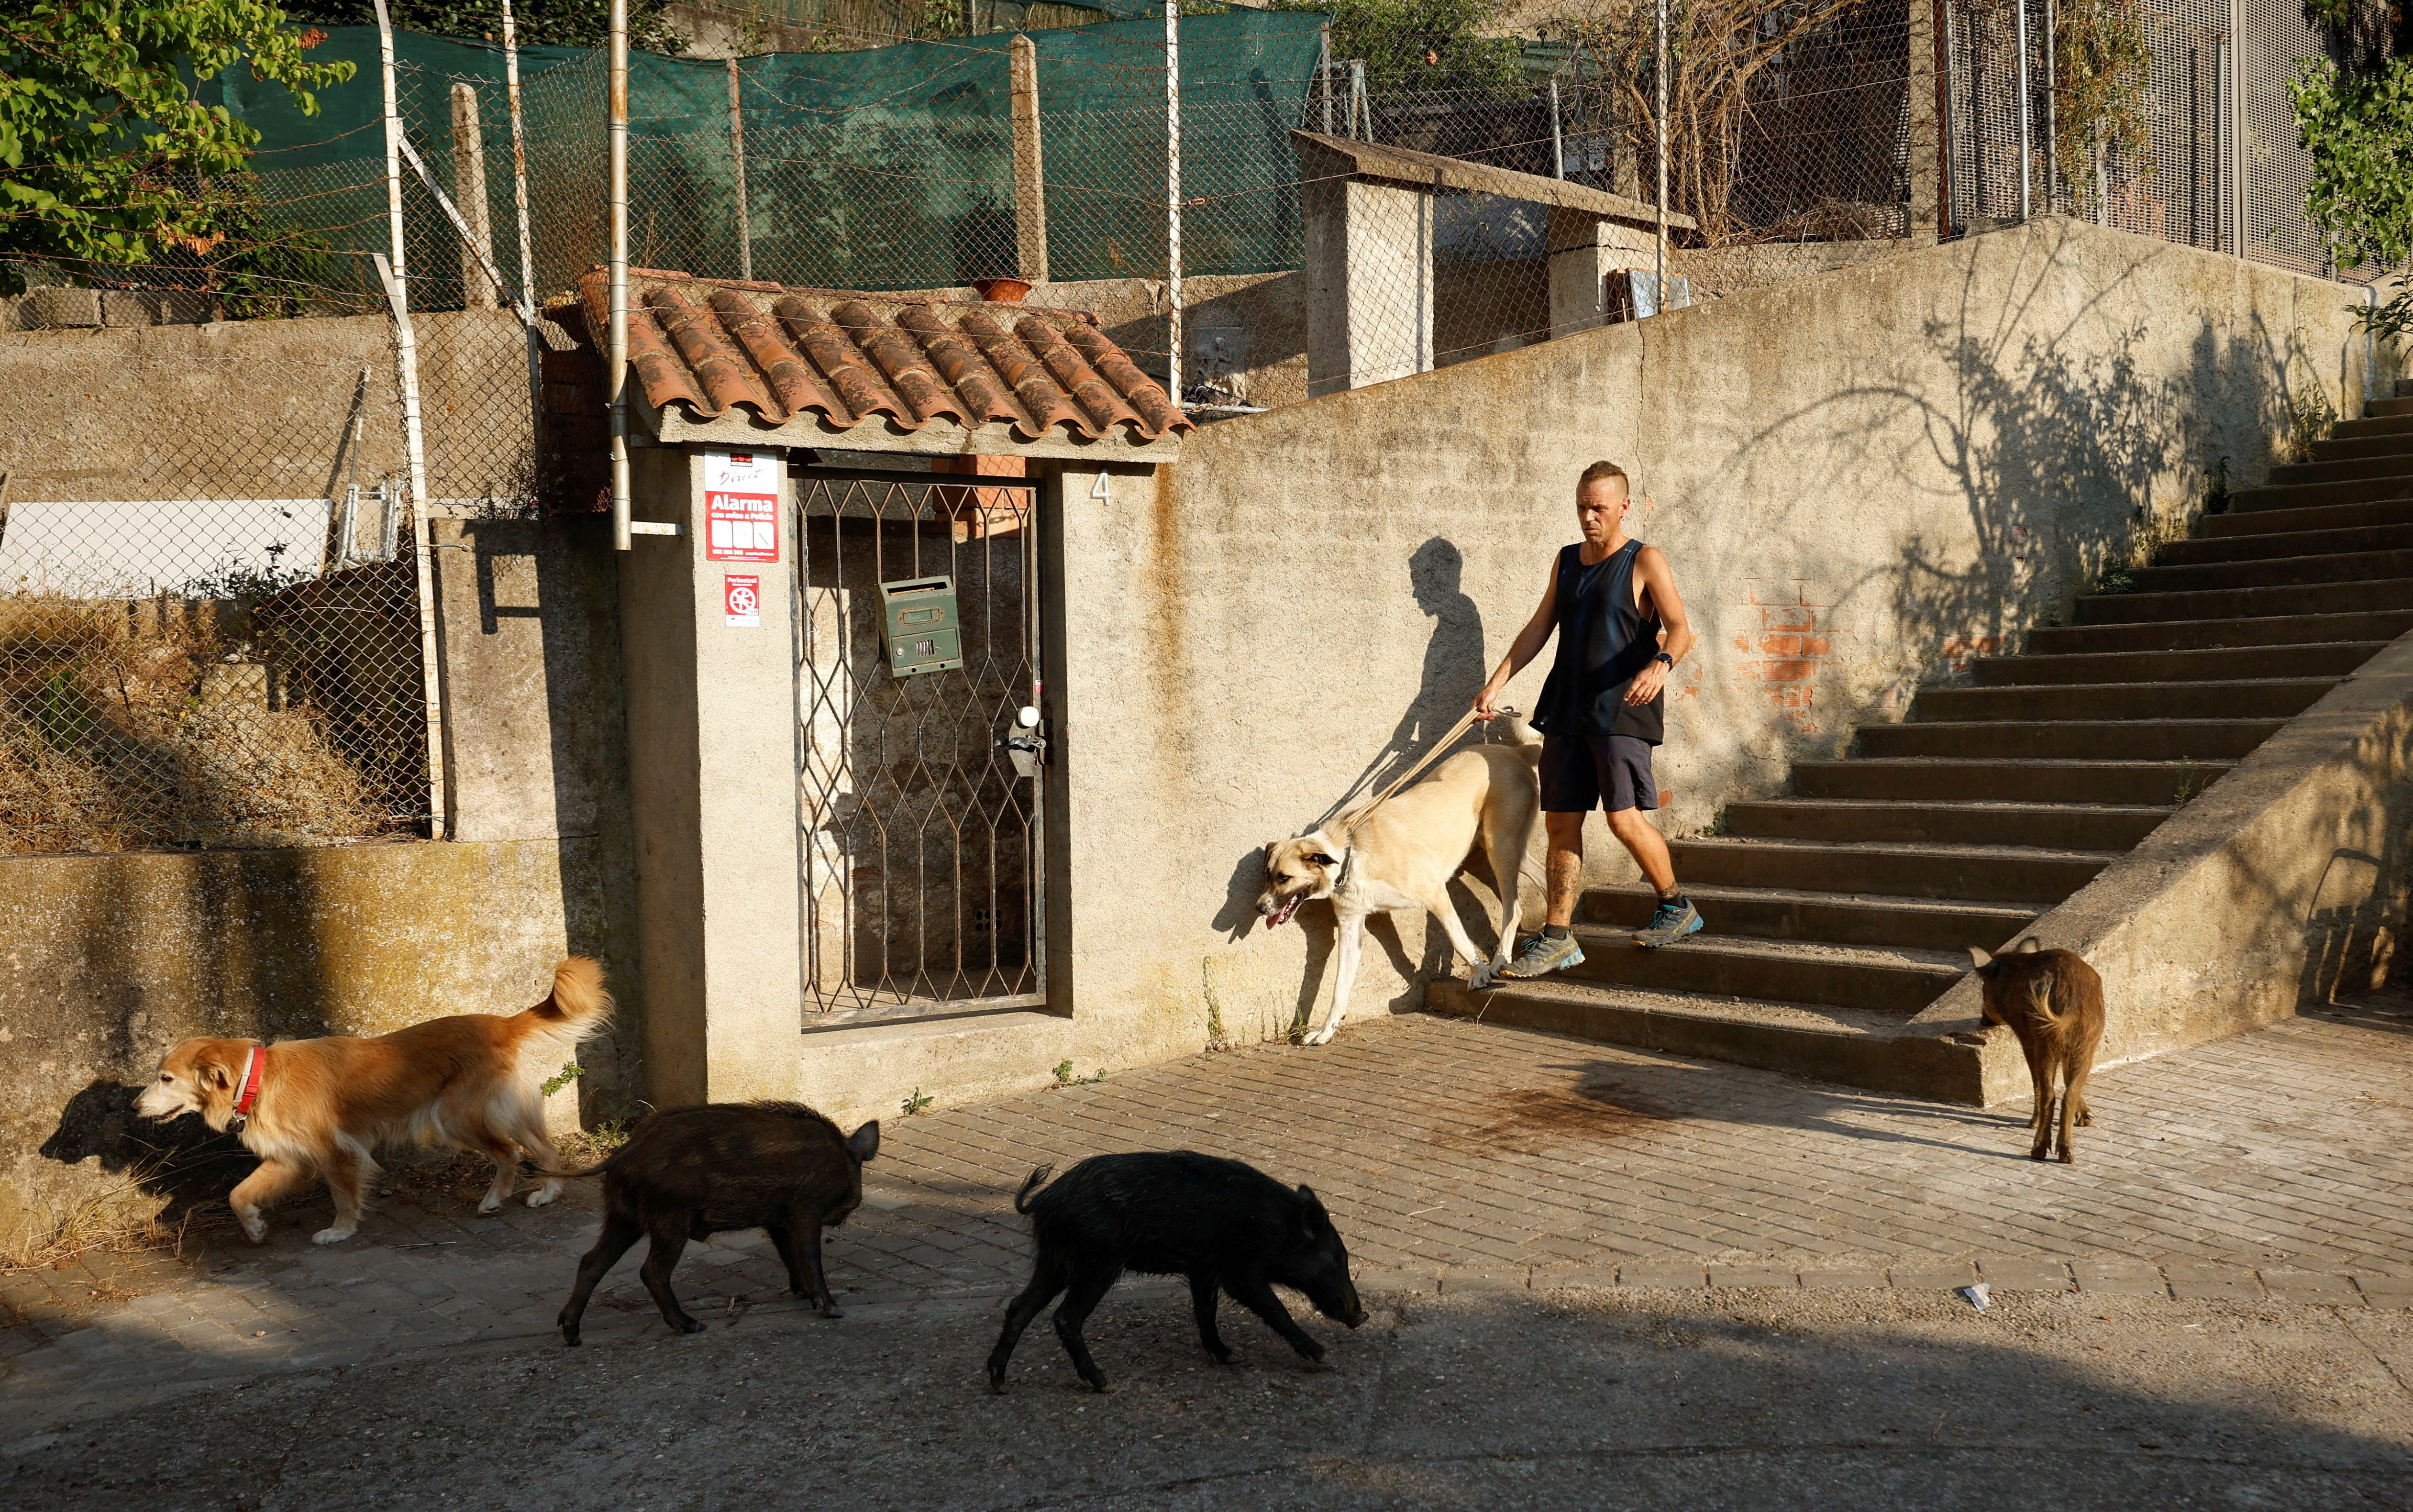 A group of boars walks past as Jordi Amat walks with his dogs, through the neighbourhood of Las Planas in the Collserola Natural Park in Barcelona